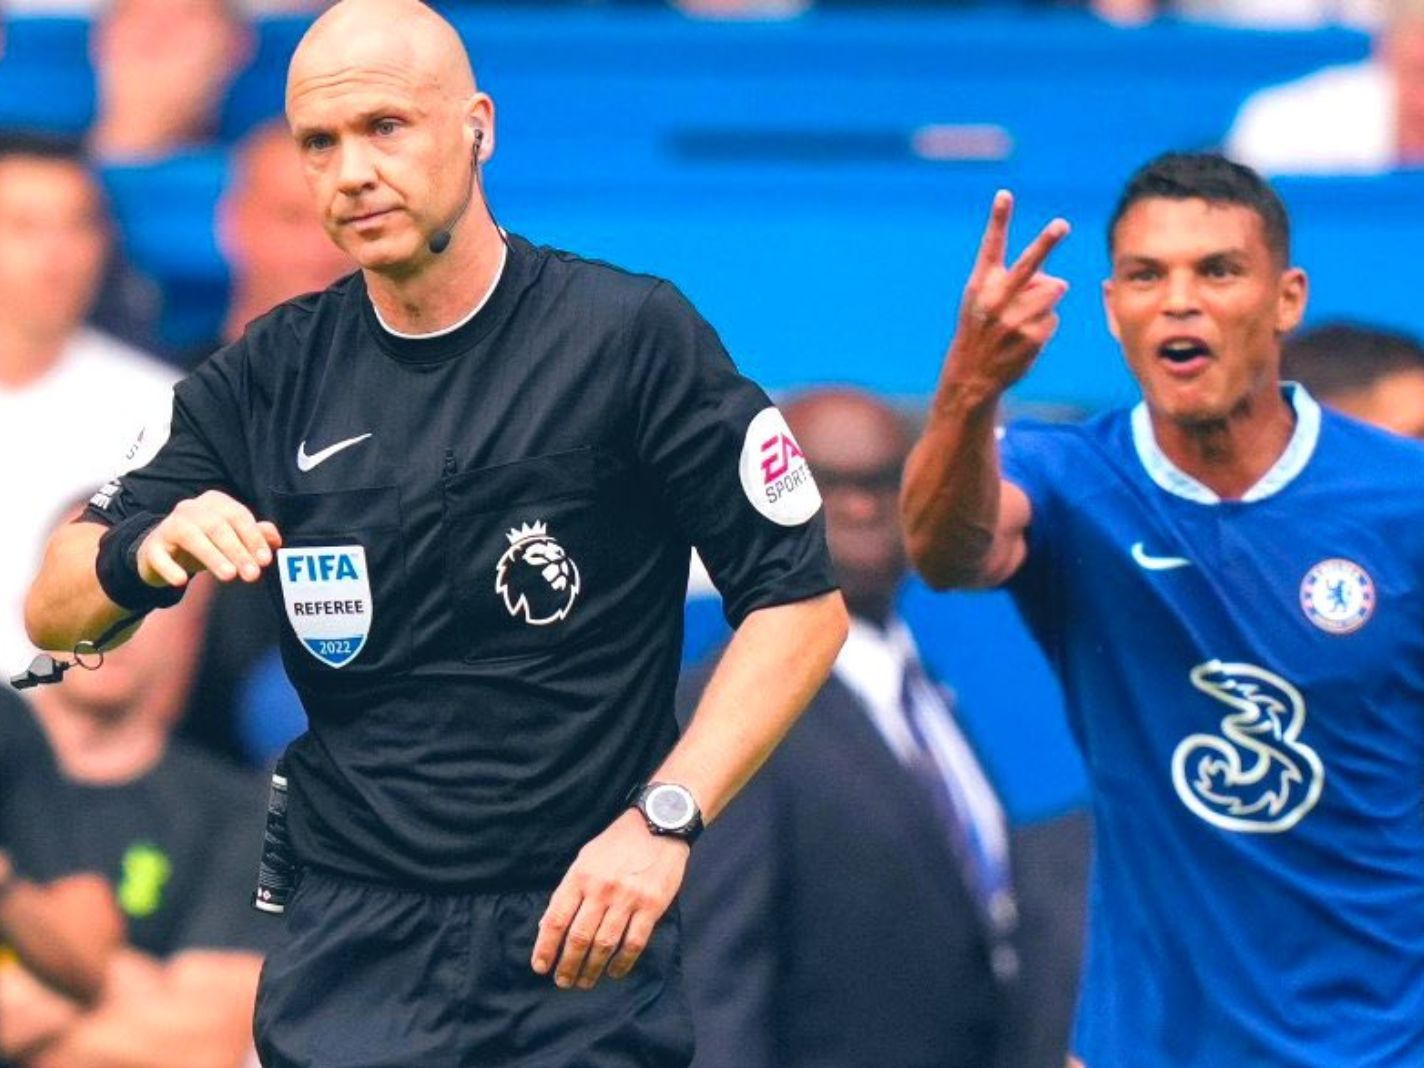 Fans Stunned as ‘Demoted’ Referee Anthony Taylor Gets Huge PL Game: ‘Chelsea Loss Downloading’